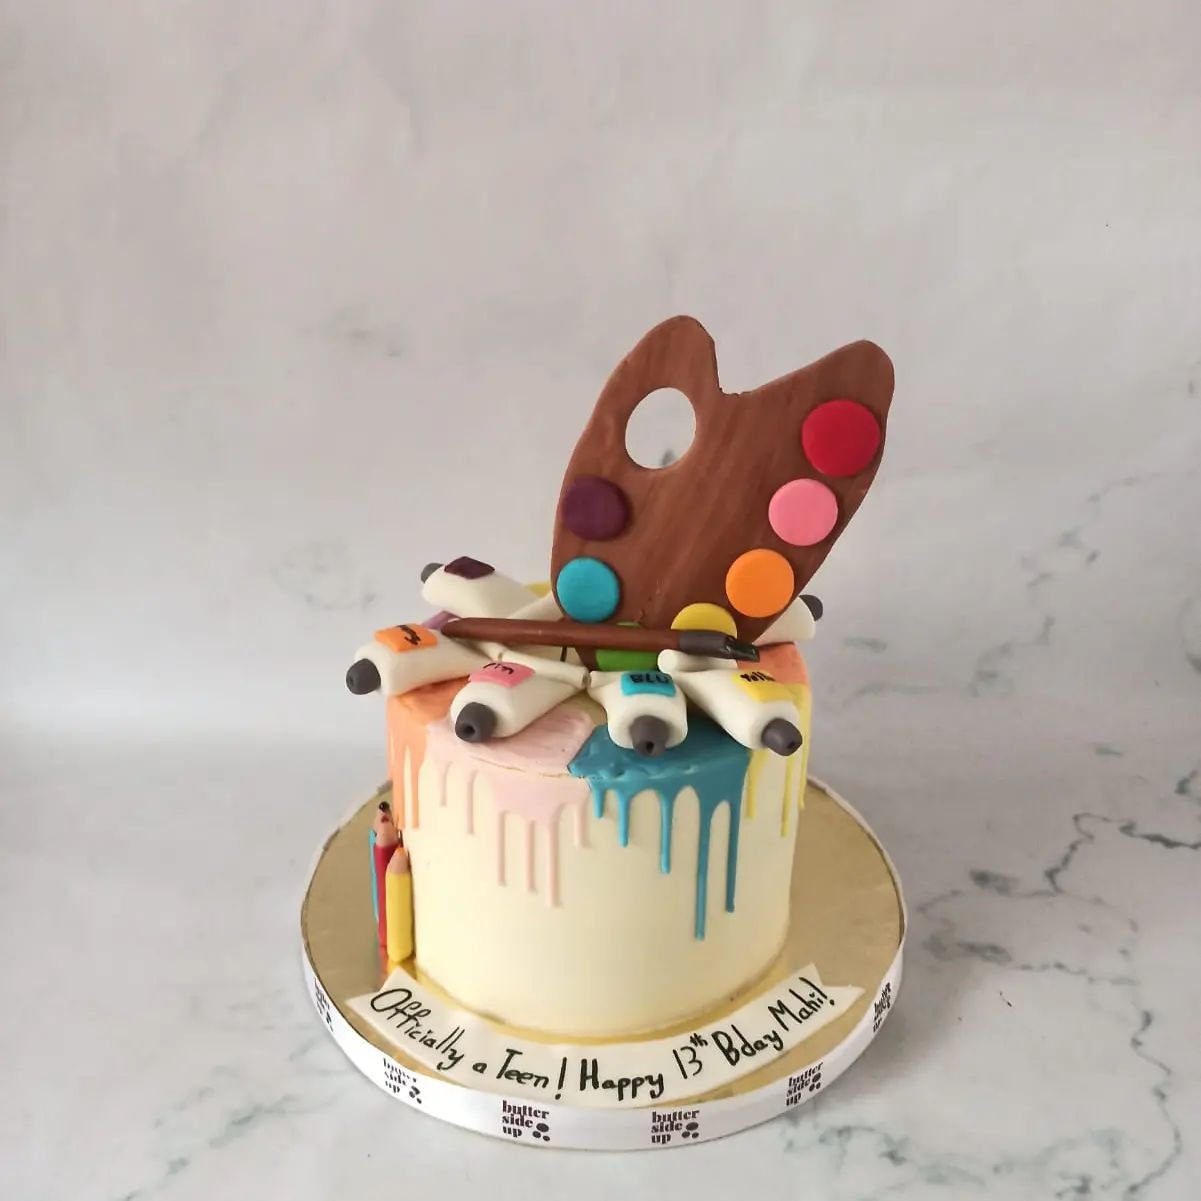 We love the colors of the painting themed cake

[ buttercream cakes, painting, white choc drip]